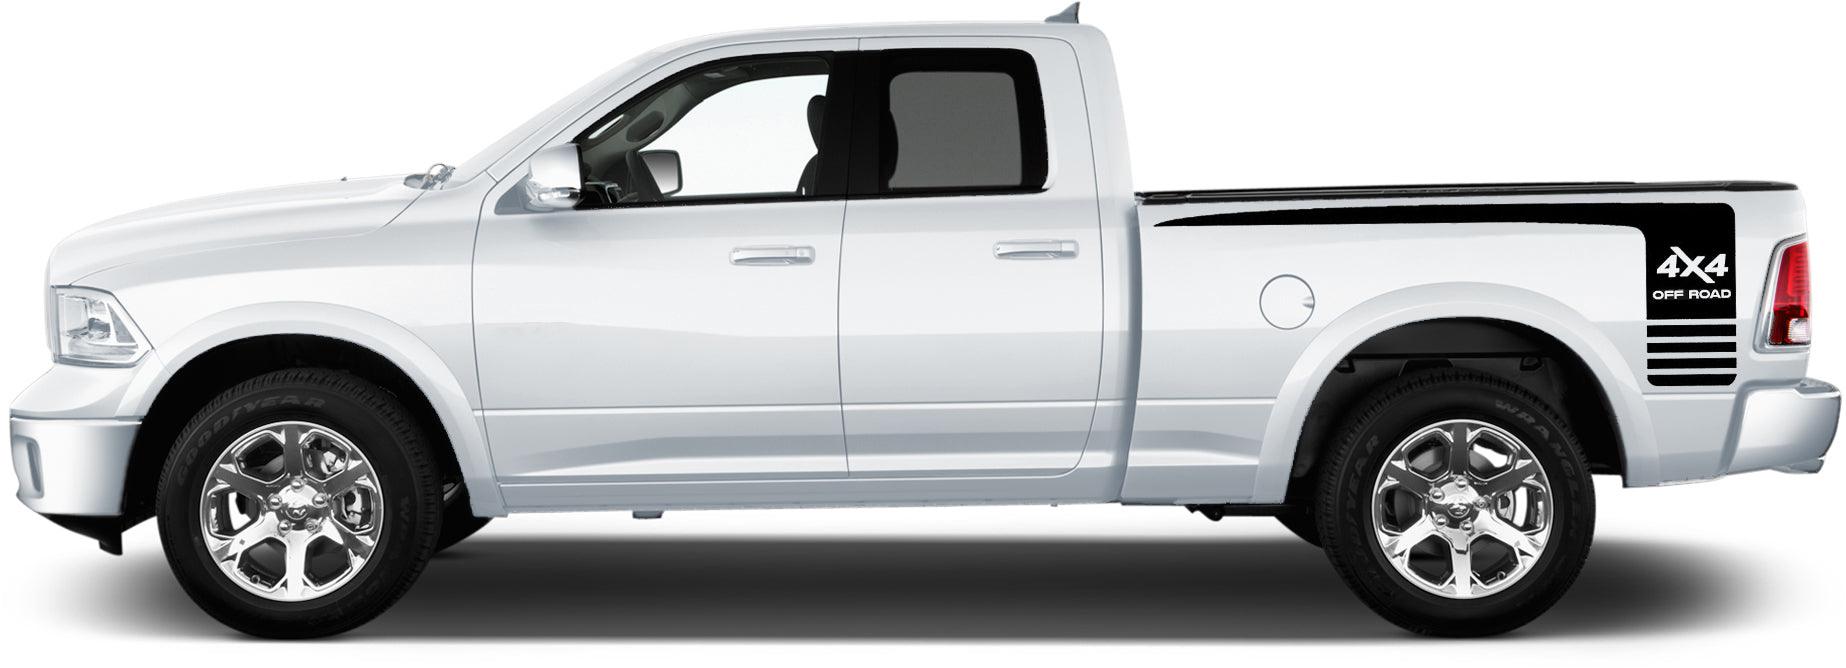 hockey 4x4 offroad bed decal kit fits dodge ram 2009 to 2023 models